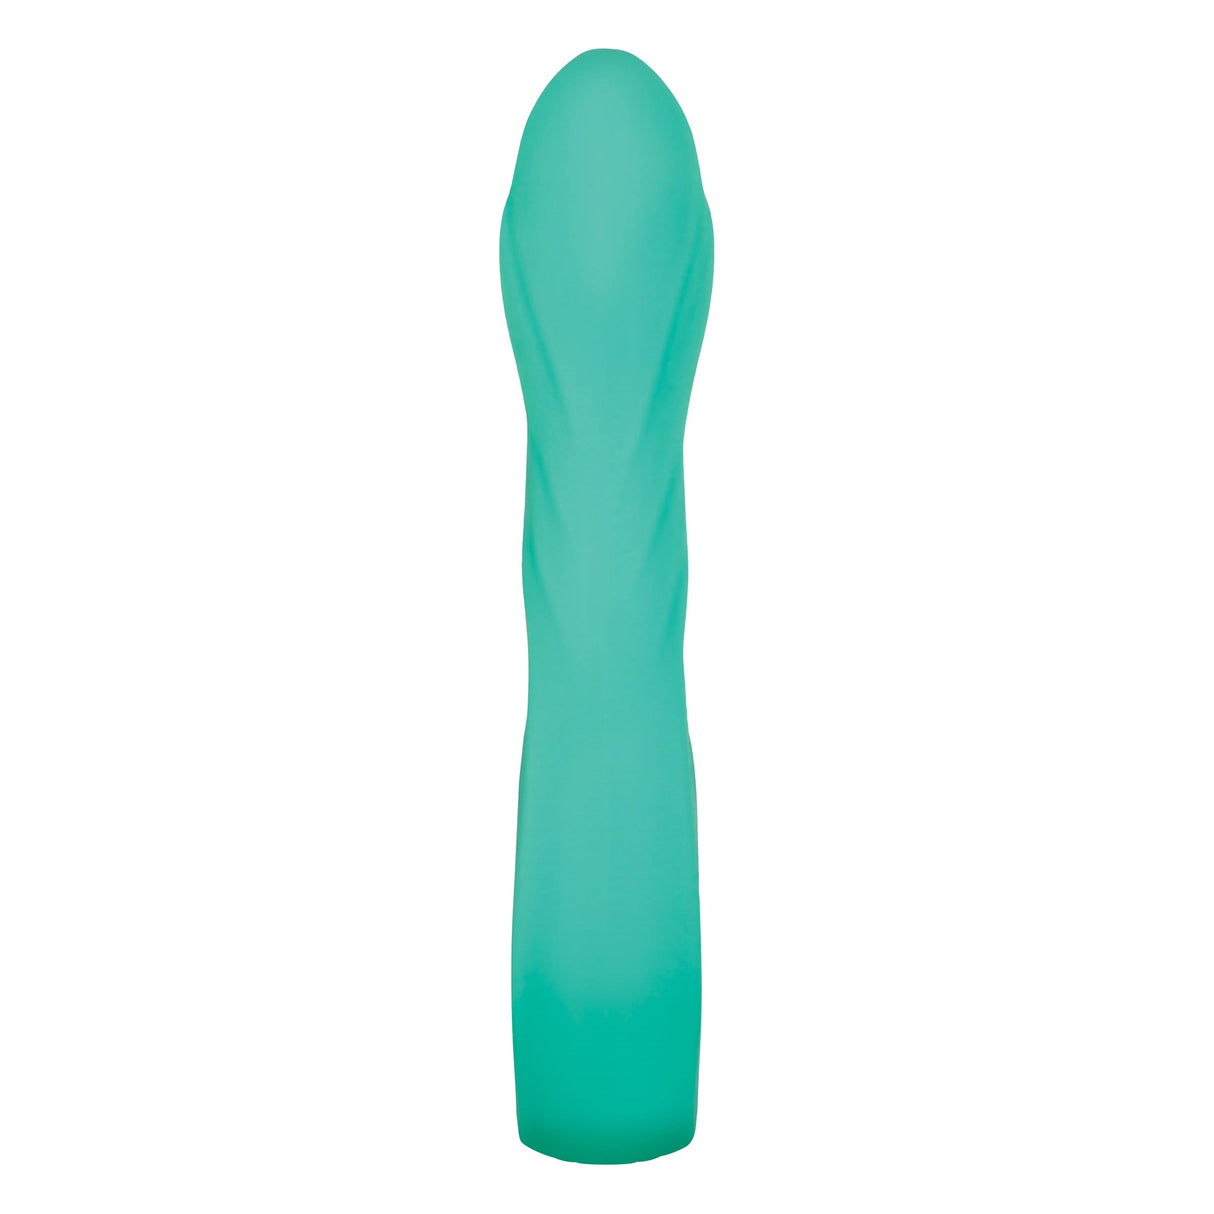 Evolved - Gender X Strapless Seashell Silicone Rechargeable Strap On (Green) EV1081 CherryAffairs